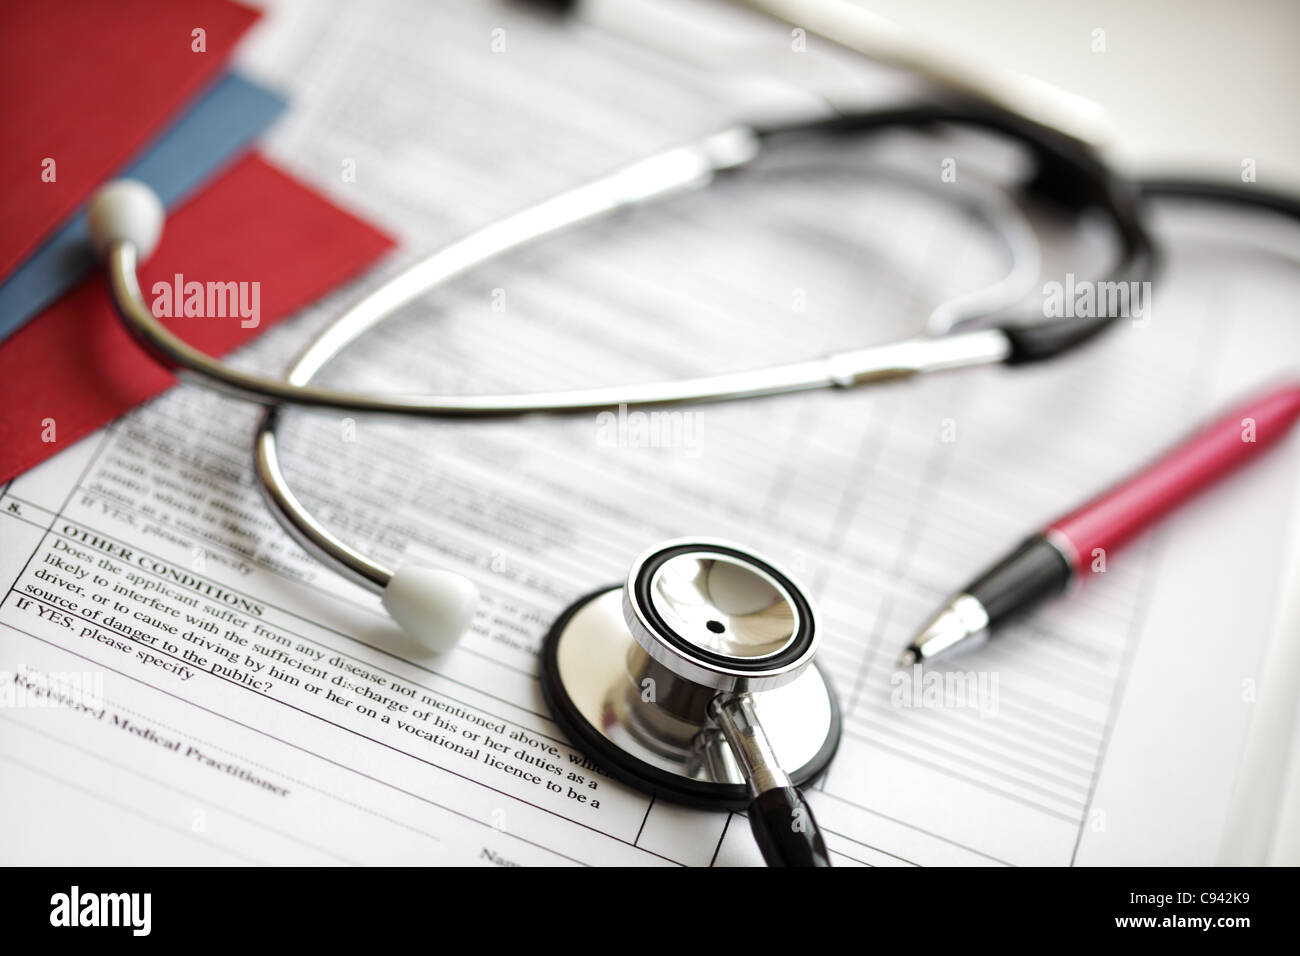 Medical records and stethoscope Stock Photo